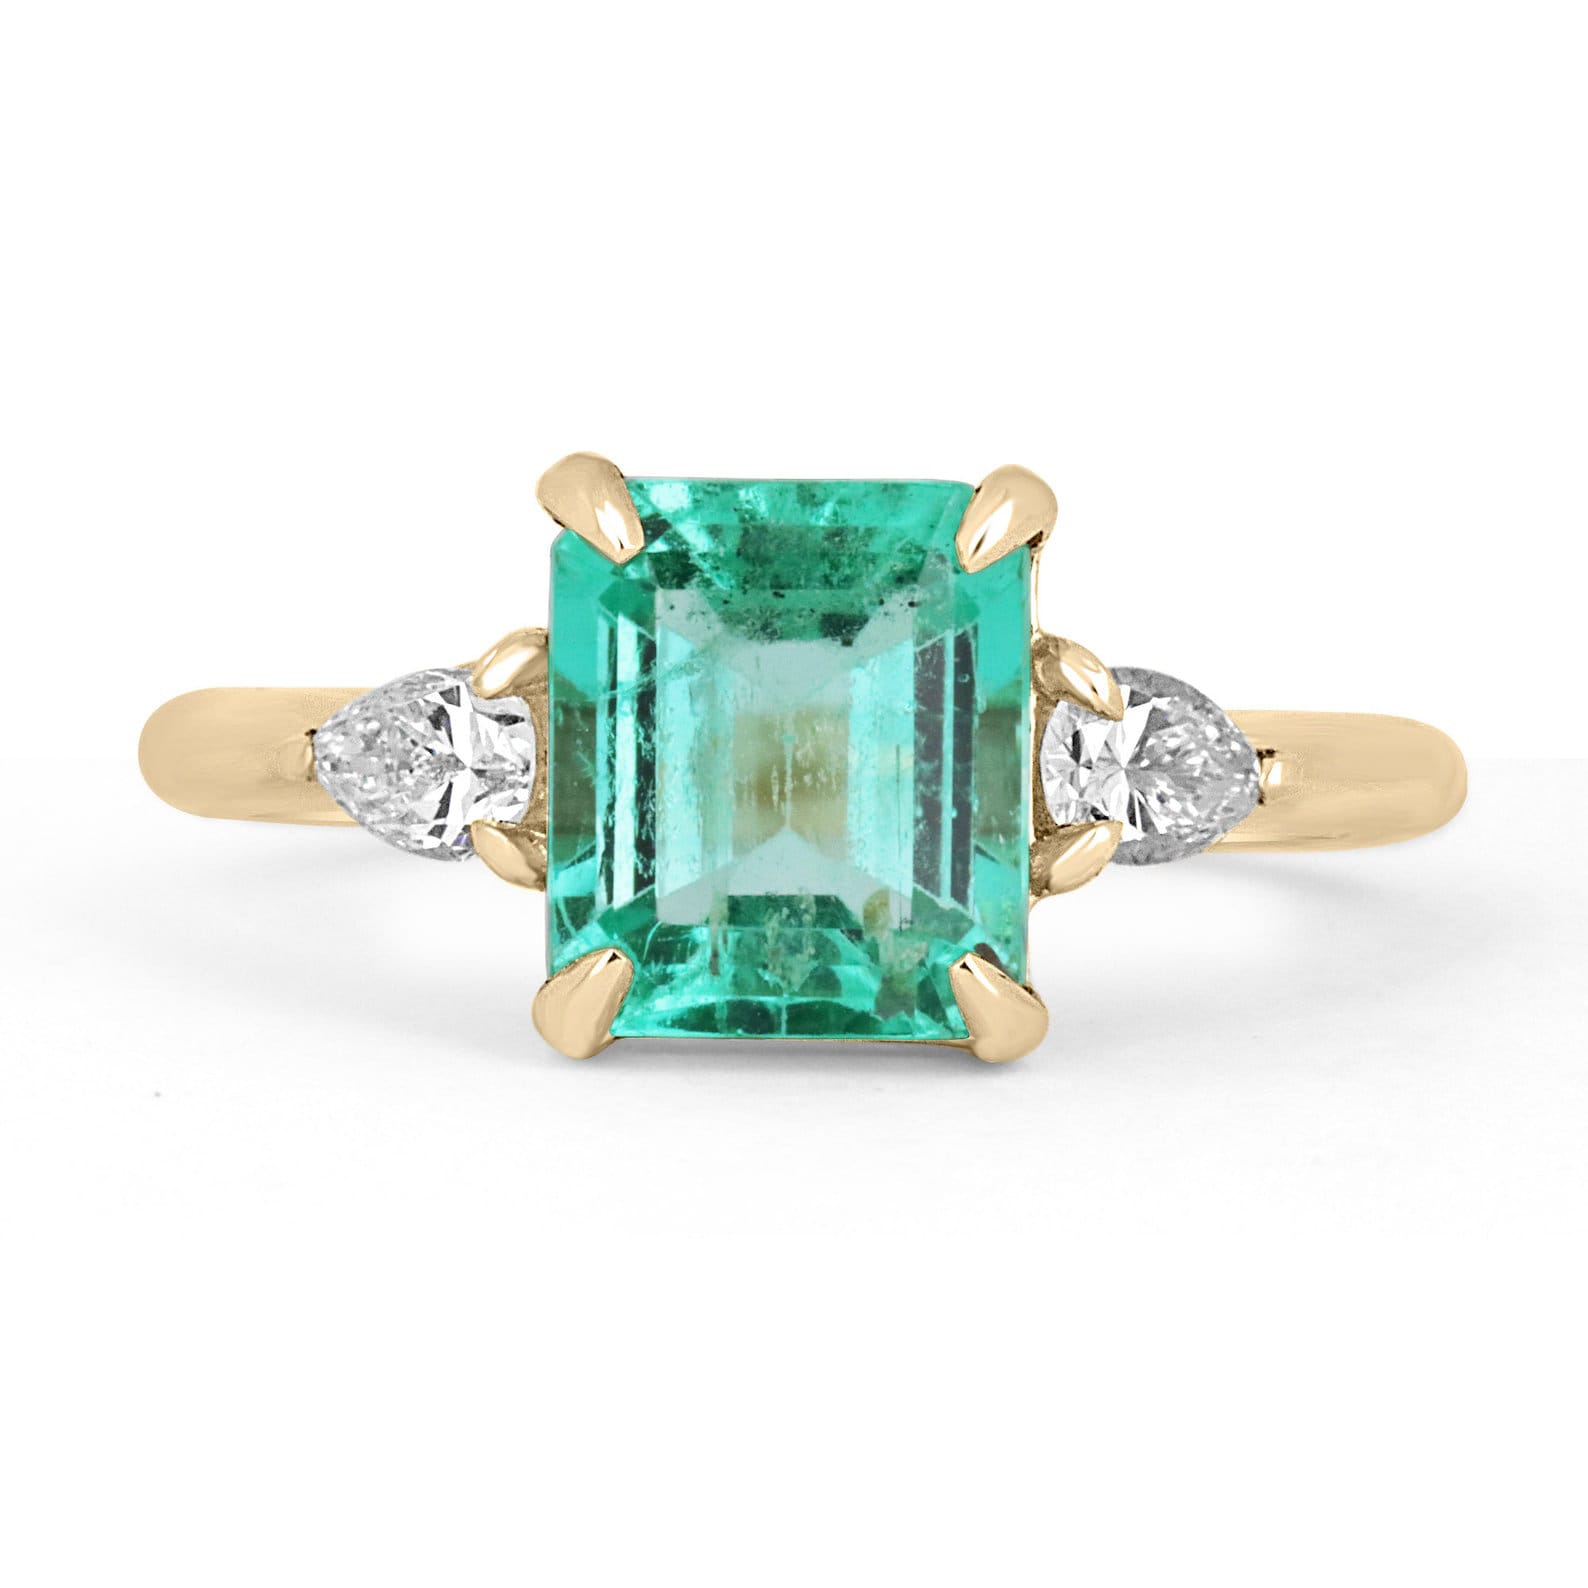 Emerald Ring 6.72 Ct. 18K Yellow Gold | The Natural Emerald Company